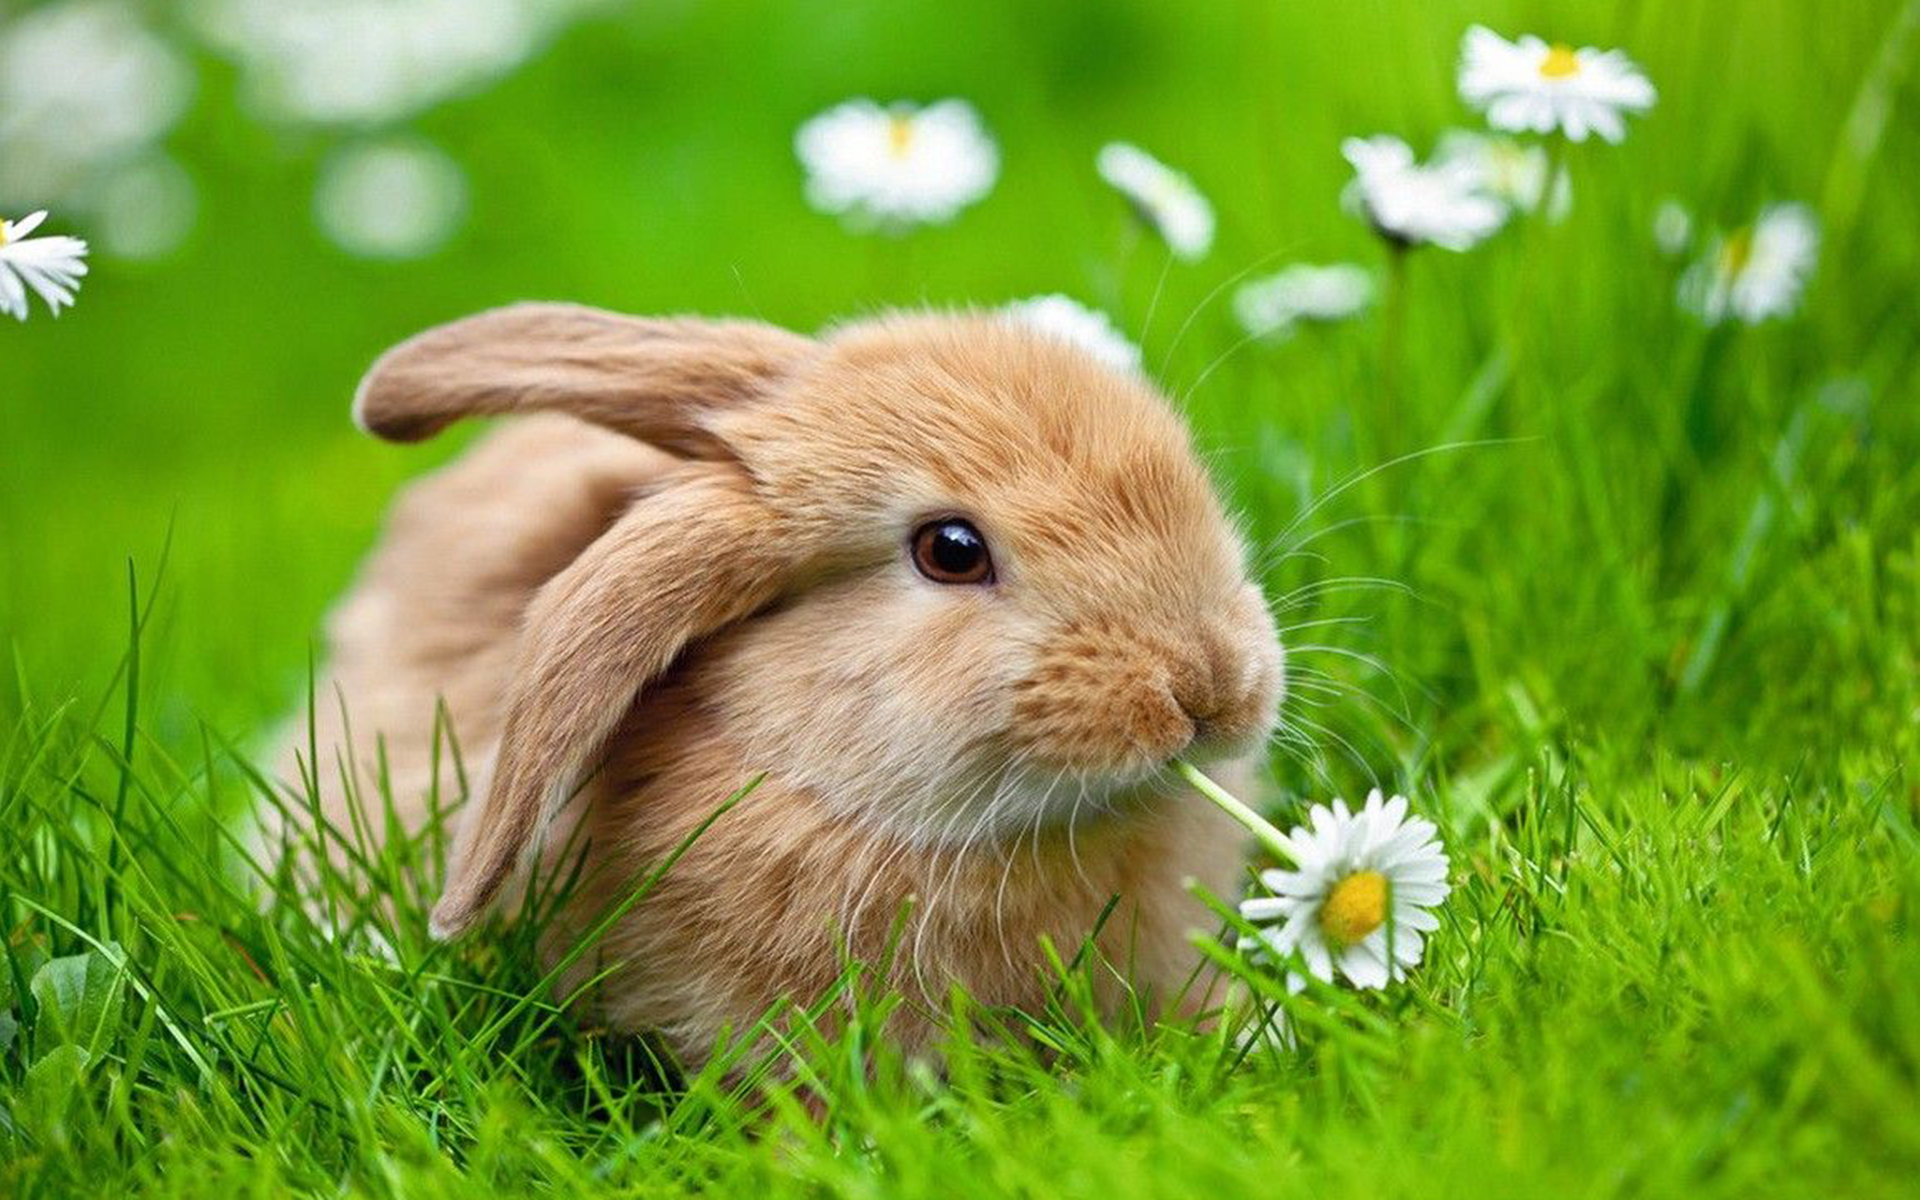 Cute Bunny Wallpaper for Windows Free Download